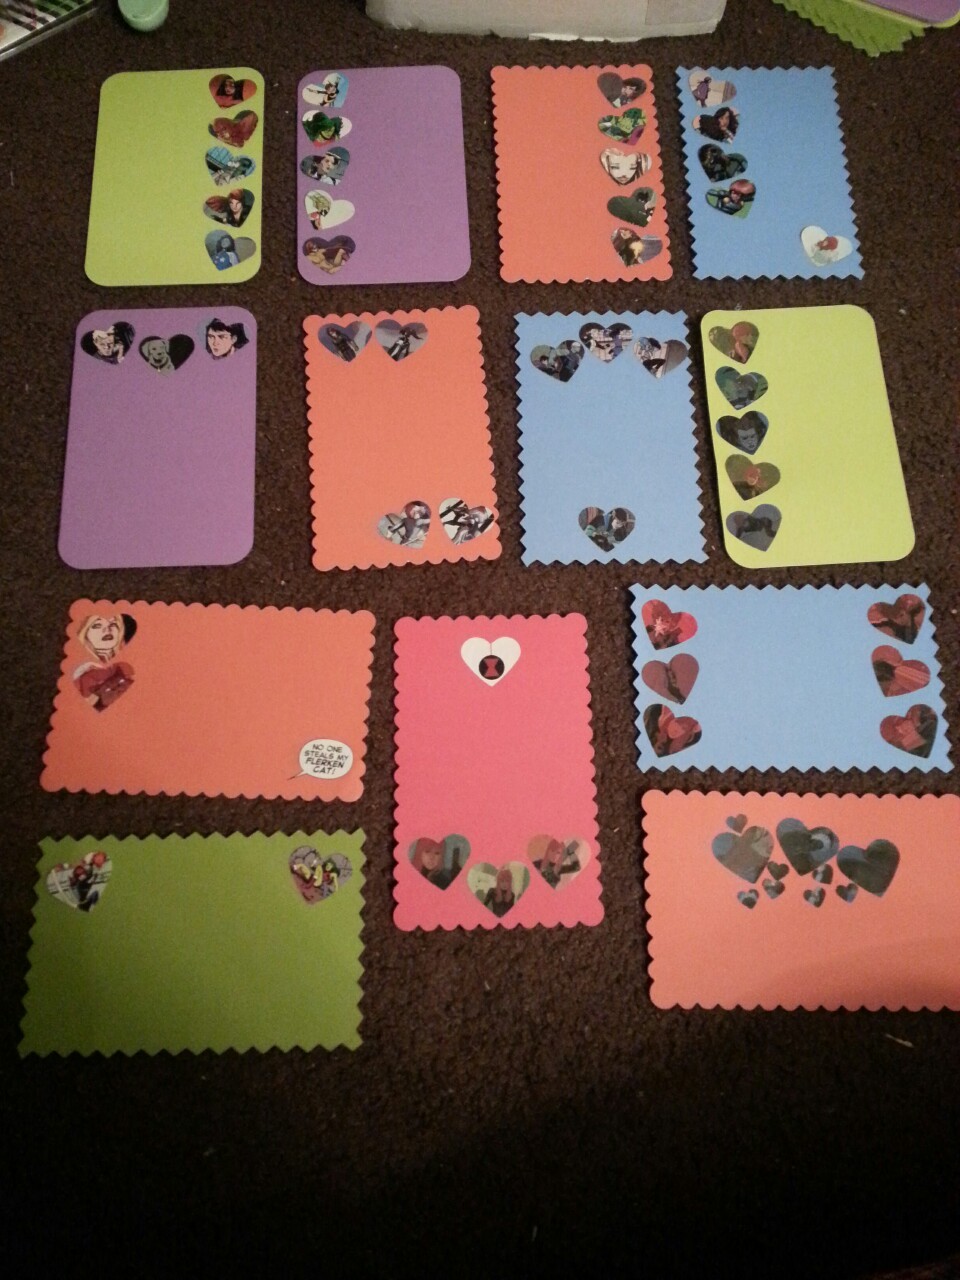 Sneak peek at some of the valentines I’ll be sending out.